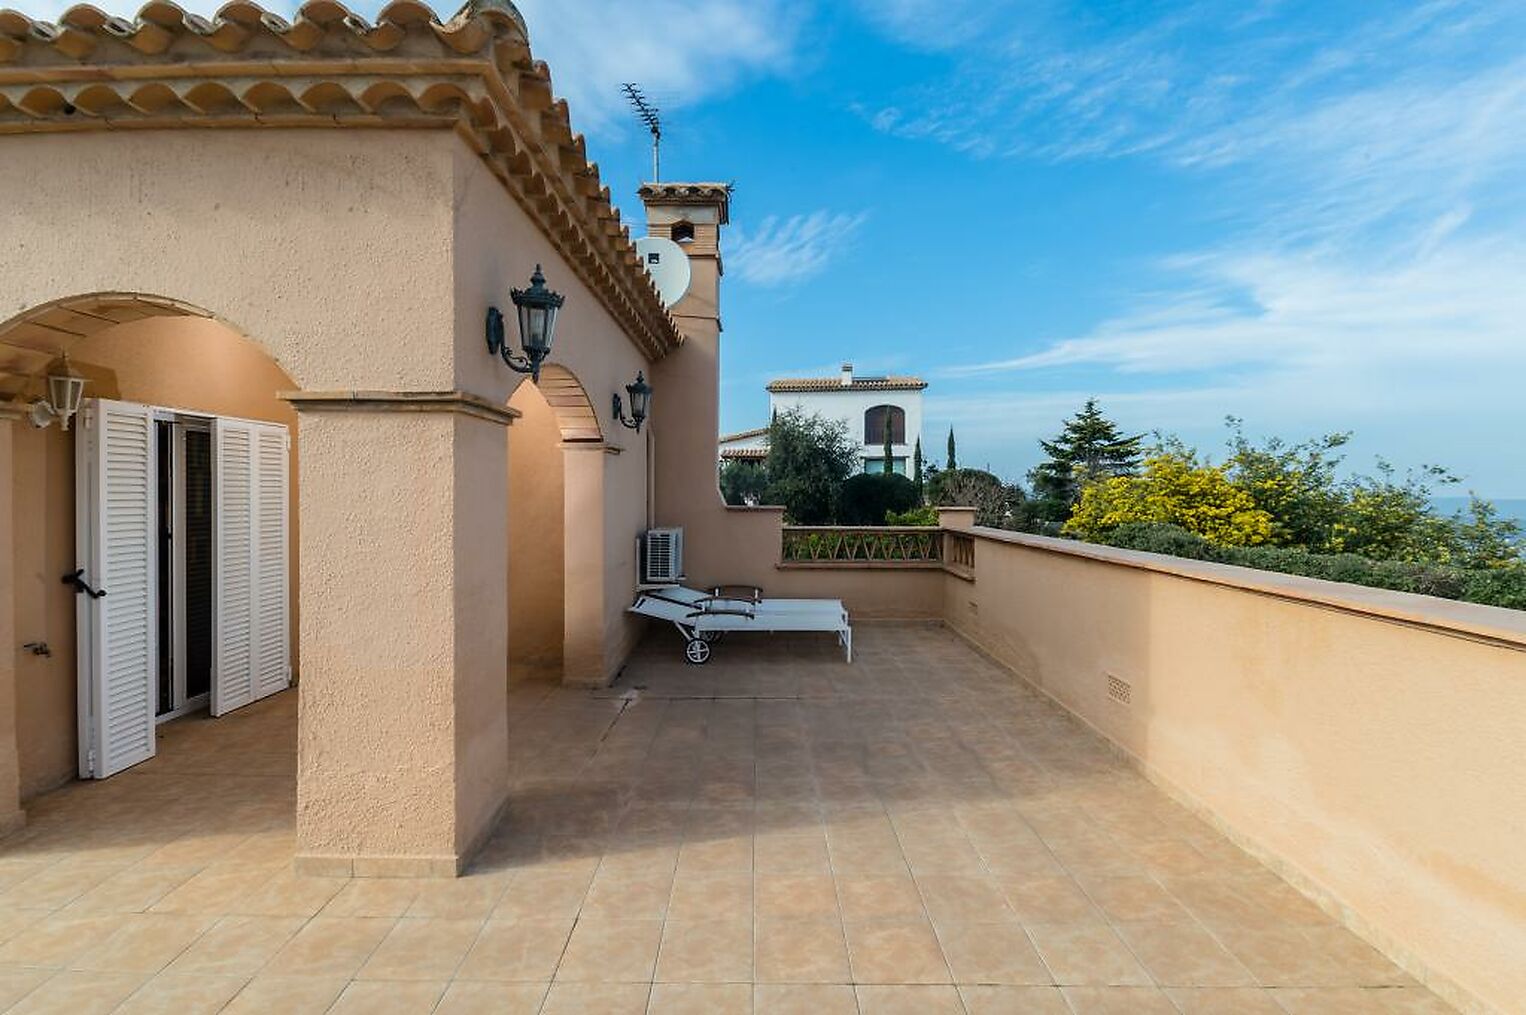 This large Villa is located in the exclusive area of Mas Nou, in Platja d'Aro.